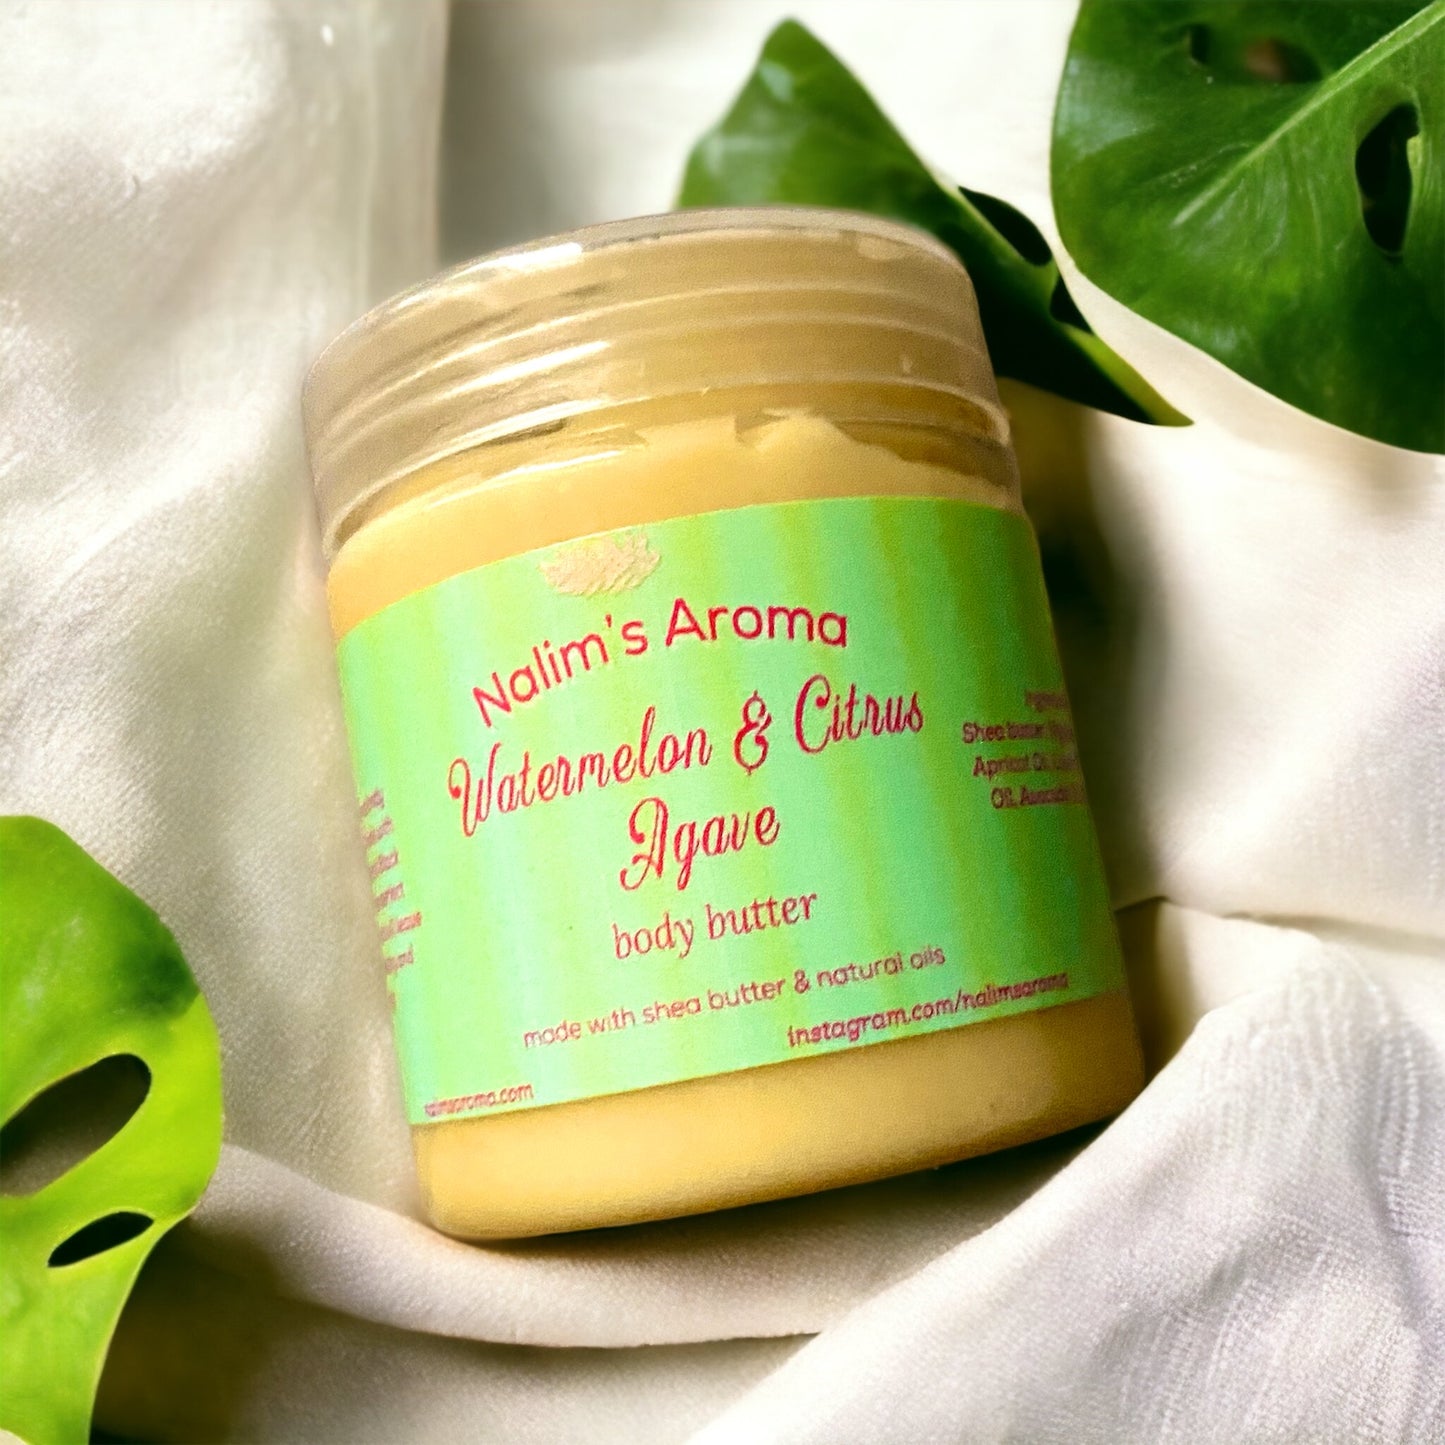 Watermelon & Citrus Agave Body Butter